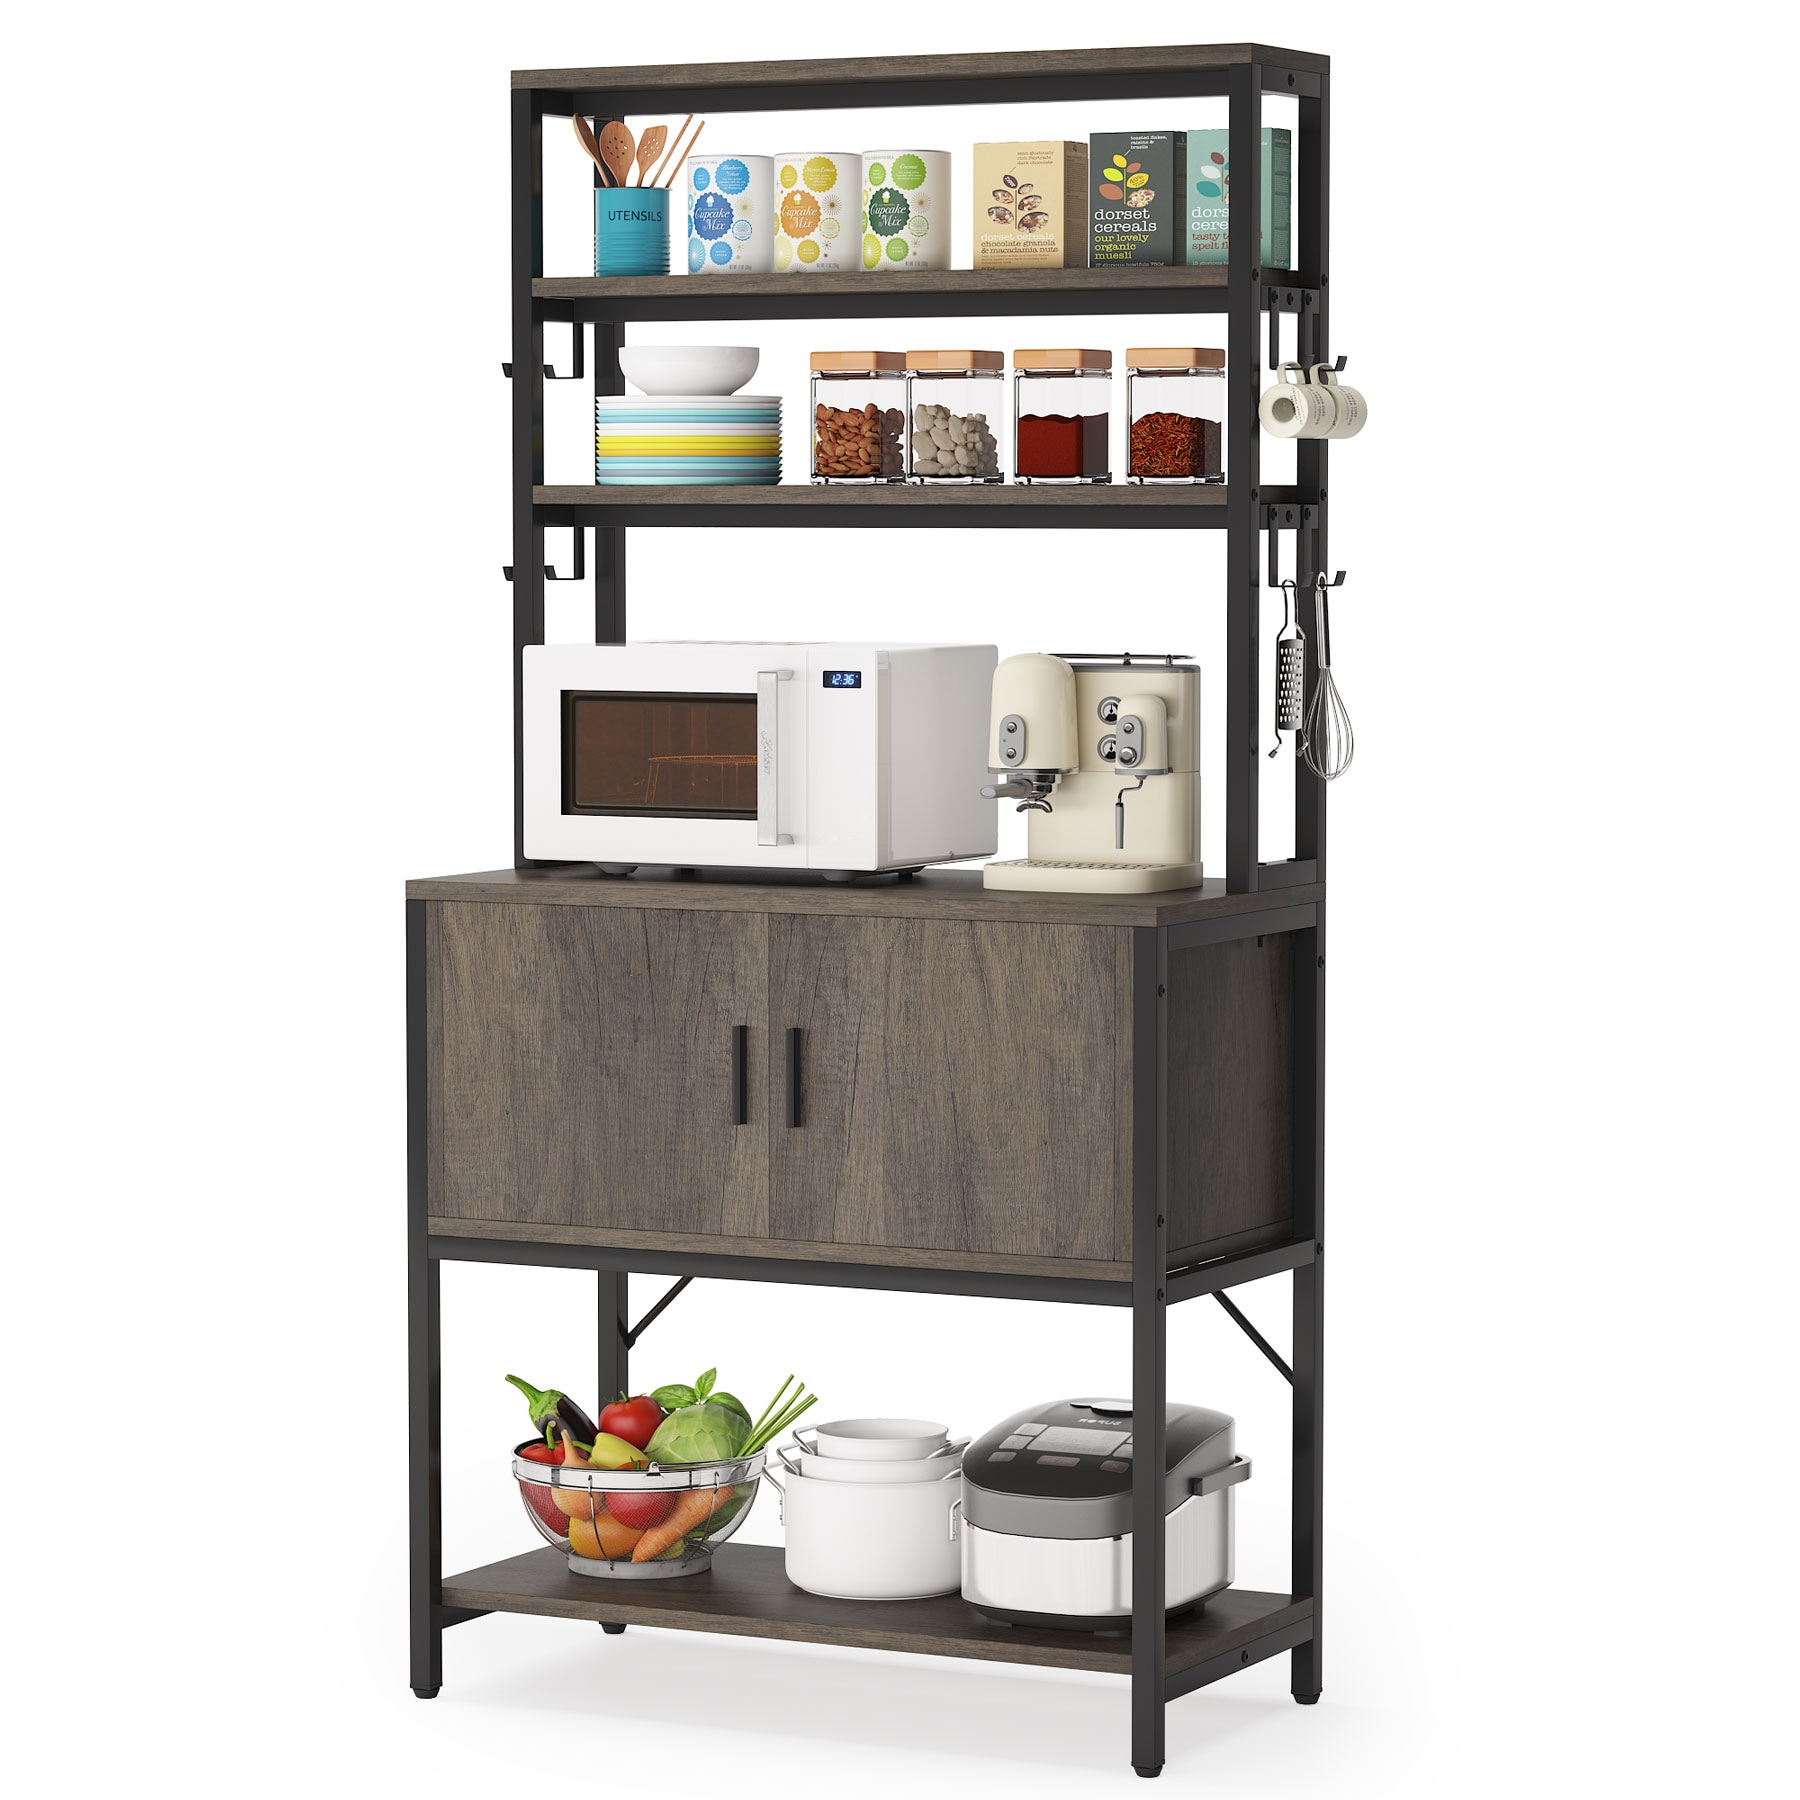 Bakers rack Dining & Kitchen Storage at Lowes.com